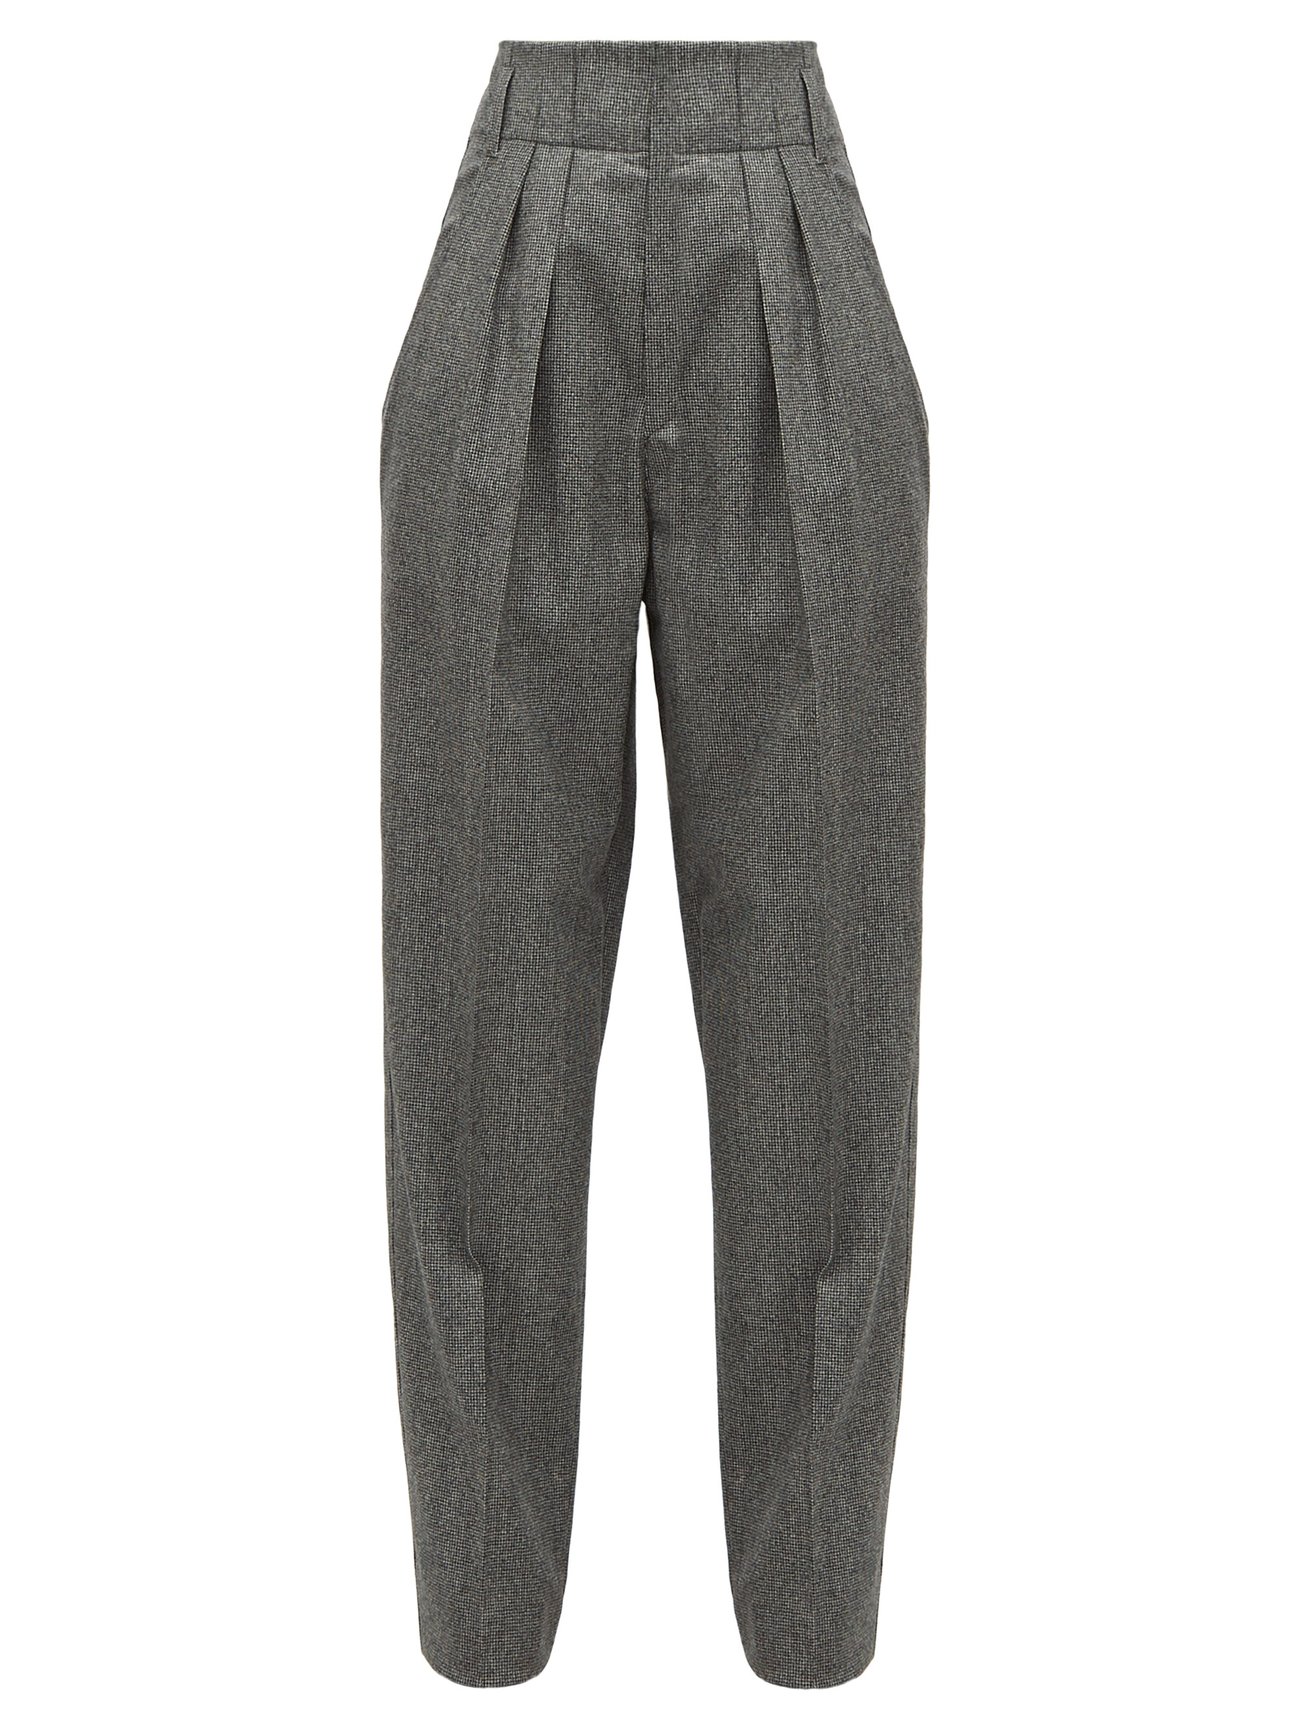 Grey Magali high-rise houndstooth wool trousers | Isabel Marant ...